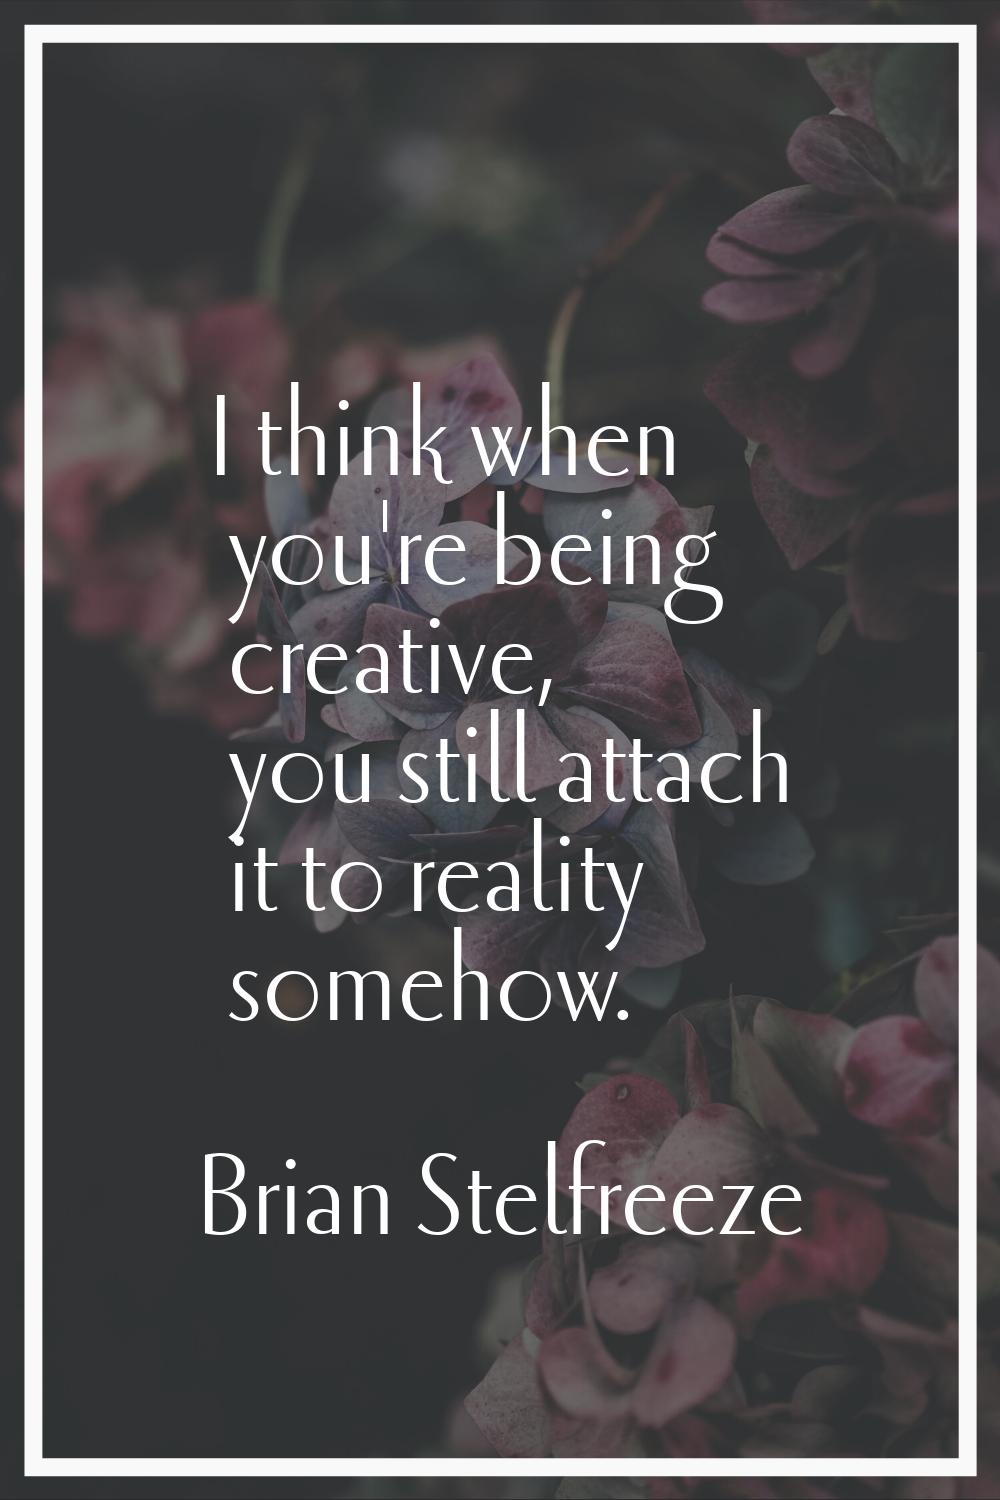 I think when you're being creative, you still attach it to reality somehow.